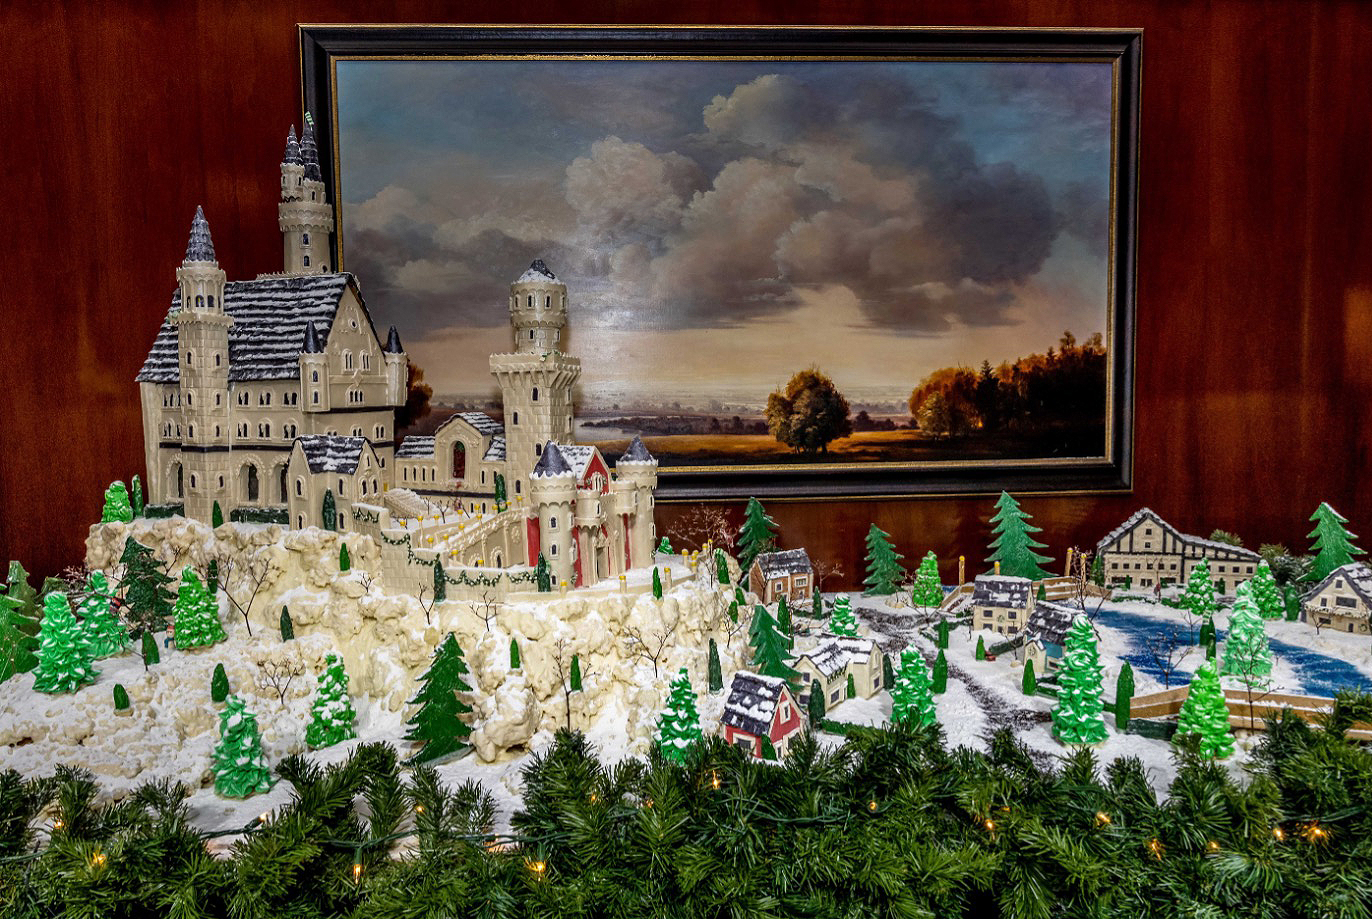 Celebrate The Holiday Season With The Benson Hotel’s Annual Gingerbread Masterpiece